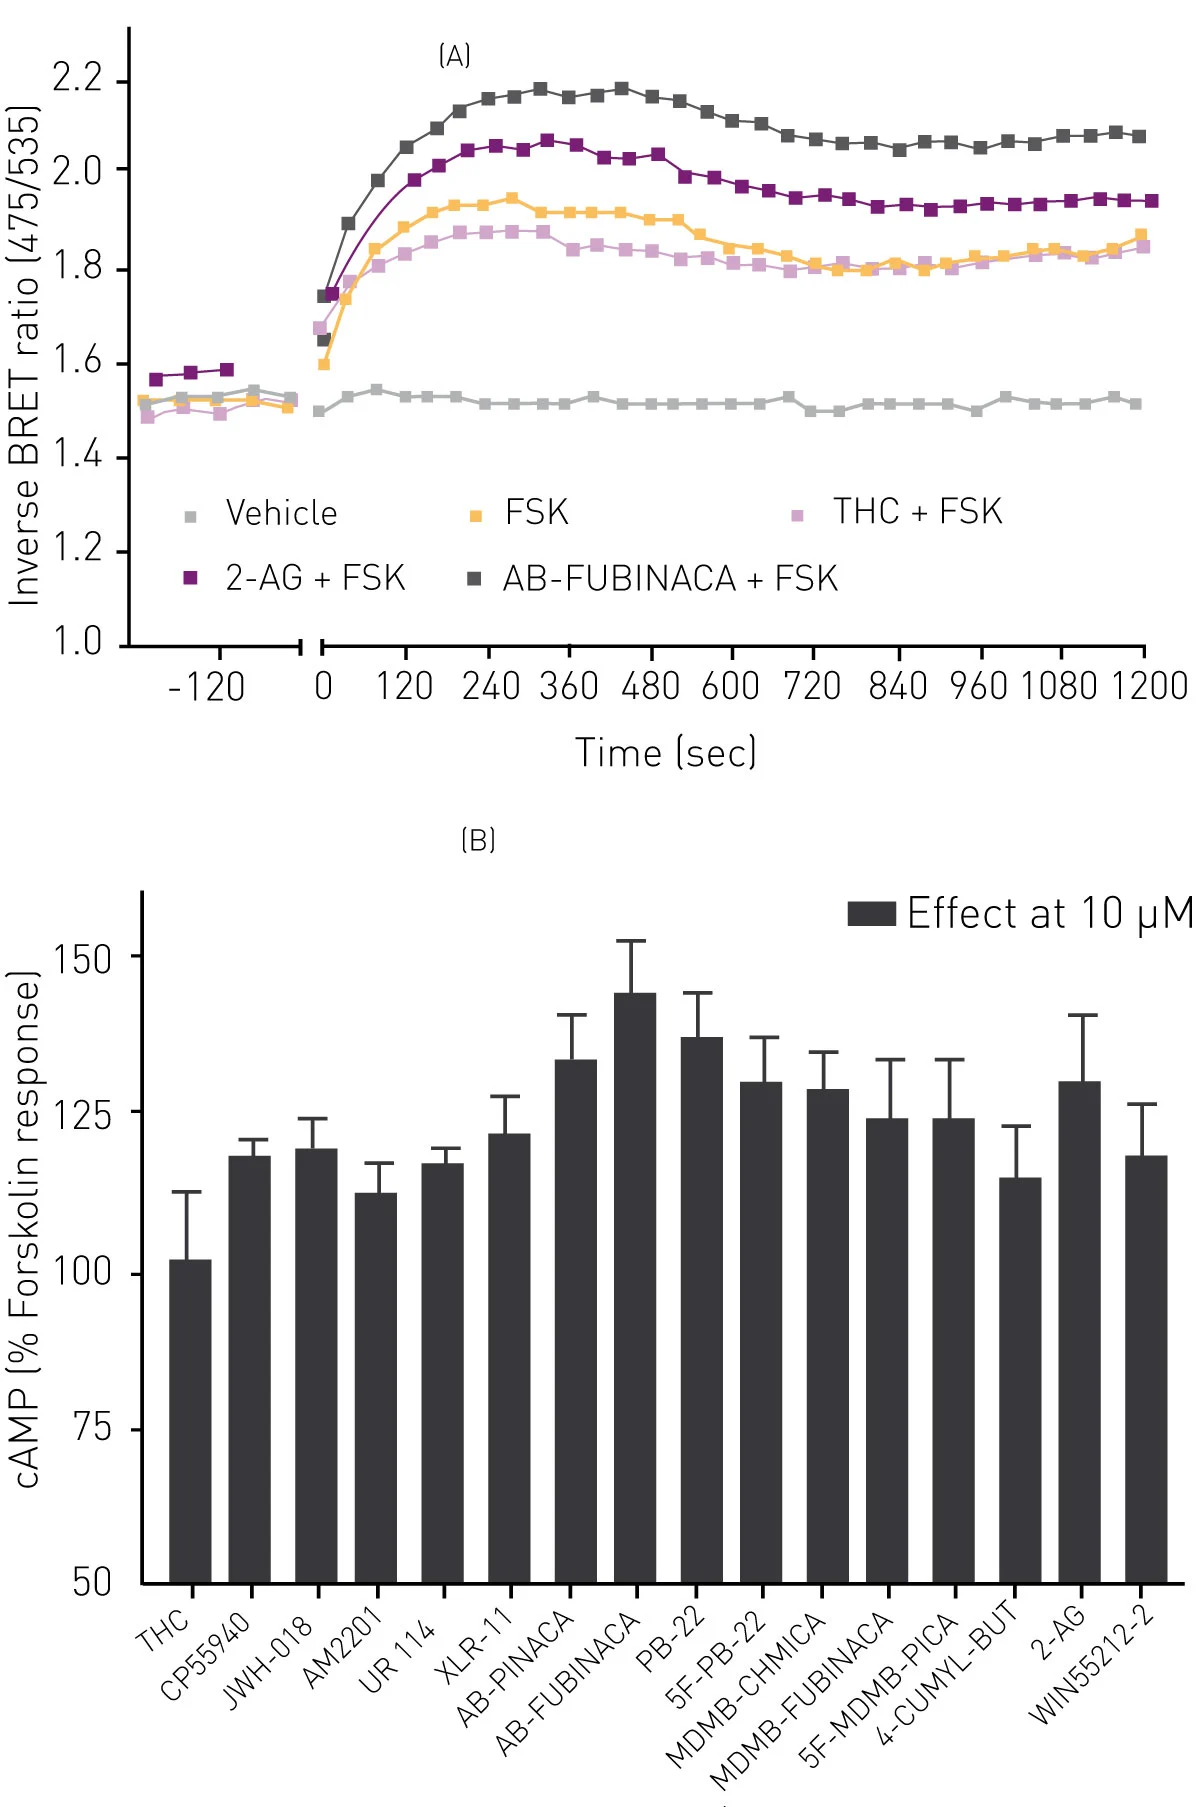 Fig. 2: A) Real-time measurement of stimulation of cAMP levels by 10µM THC, 2-arachidinoylglycerol and AB-FUBINACA in HEK-CB1 cells. B) Summary cAMP signaling peaks for 16 cannabinoids showing increase in cAMP levels above that of FSK (3µM) alone (100%).